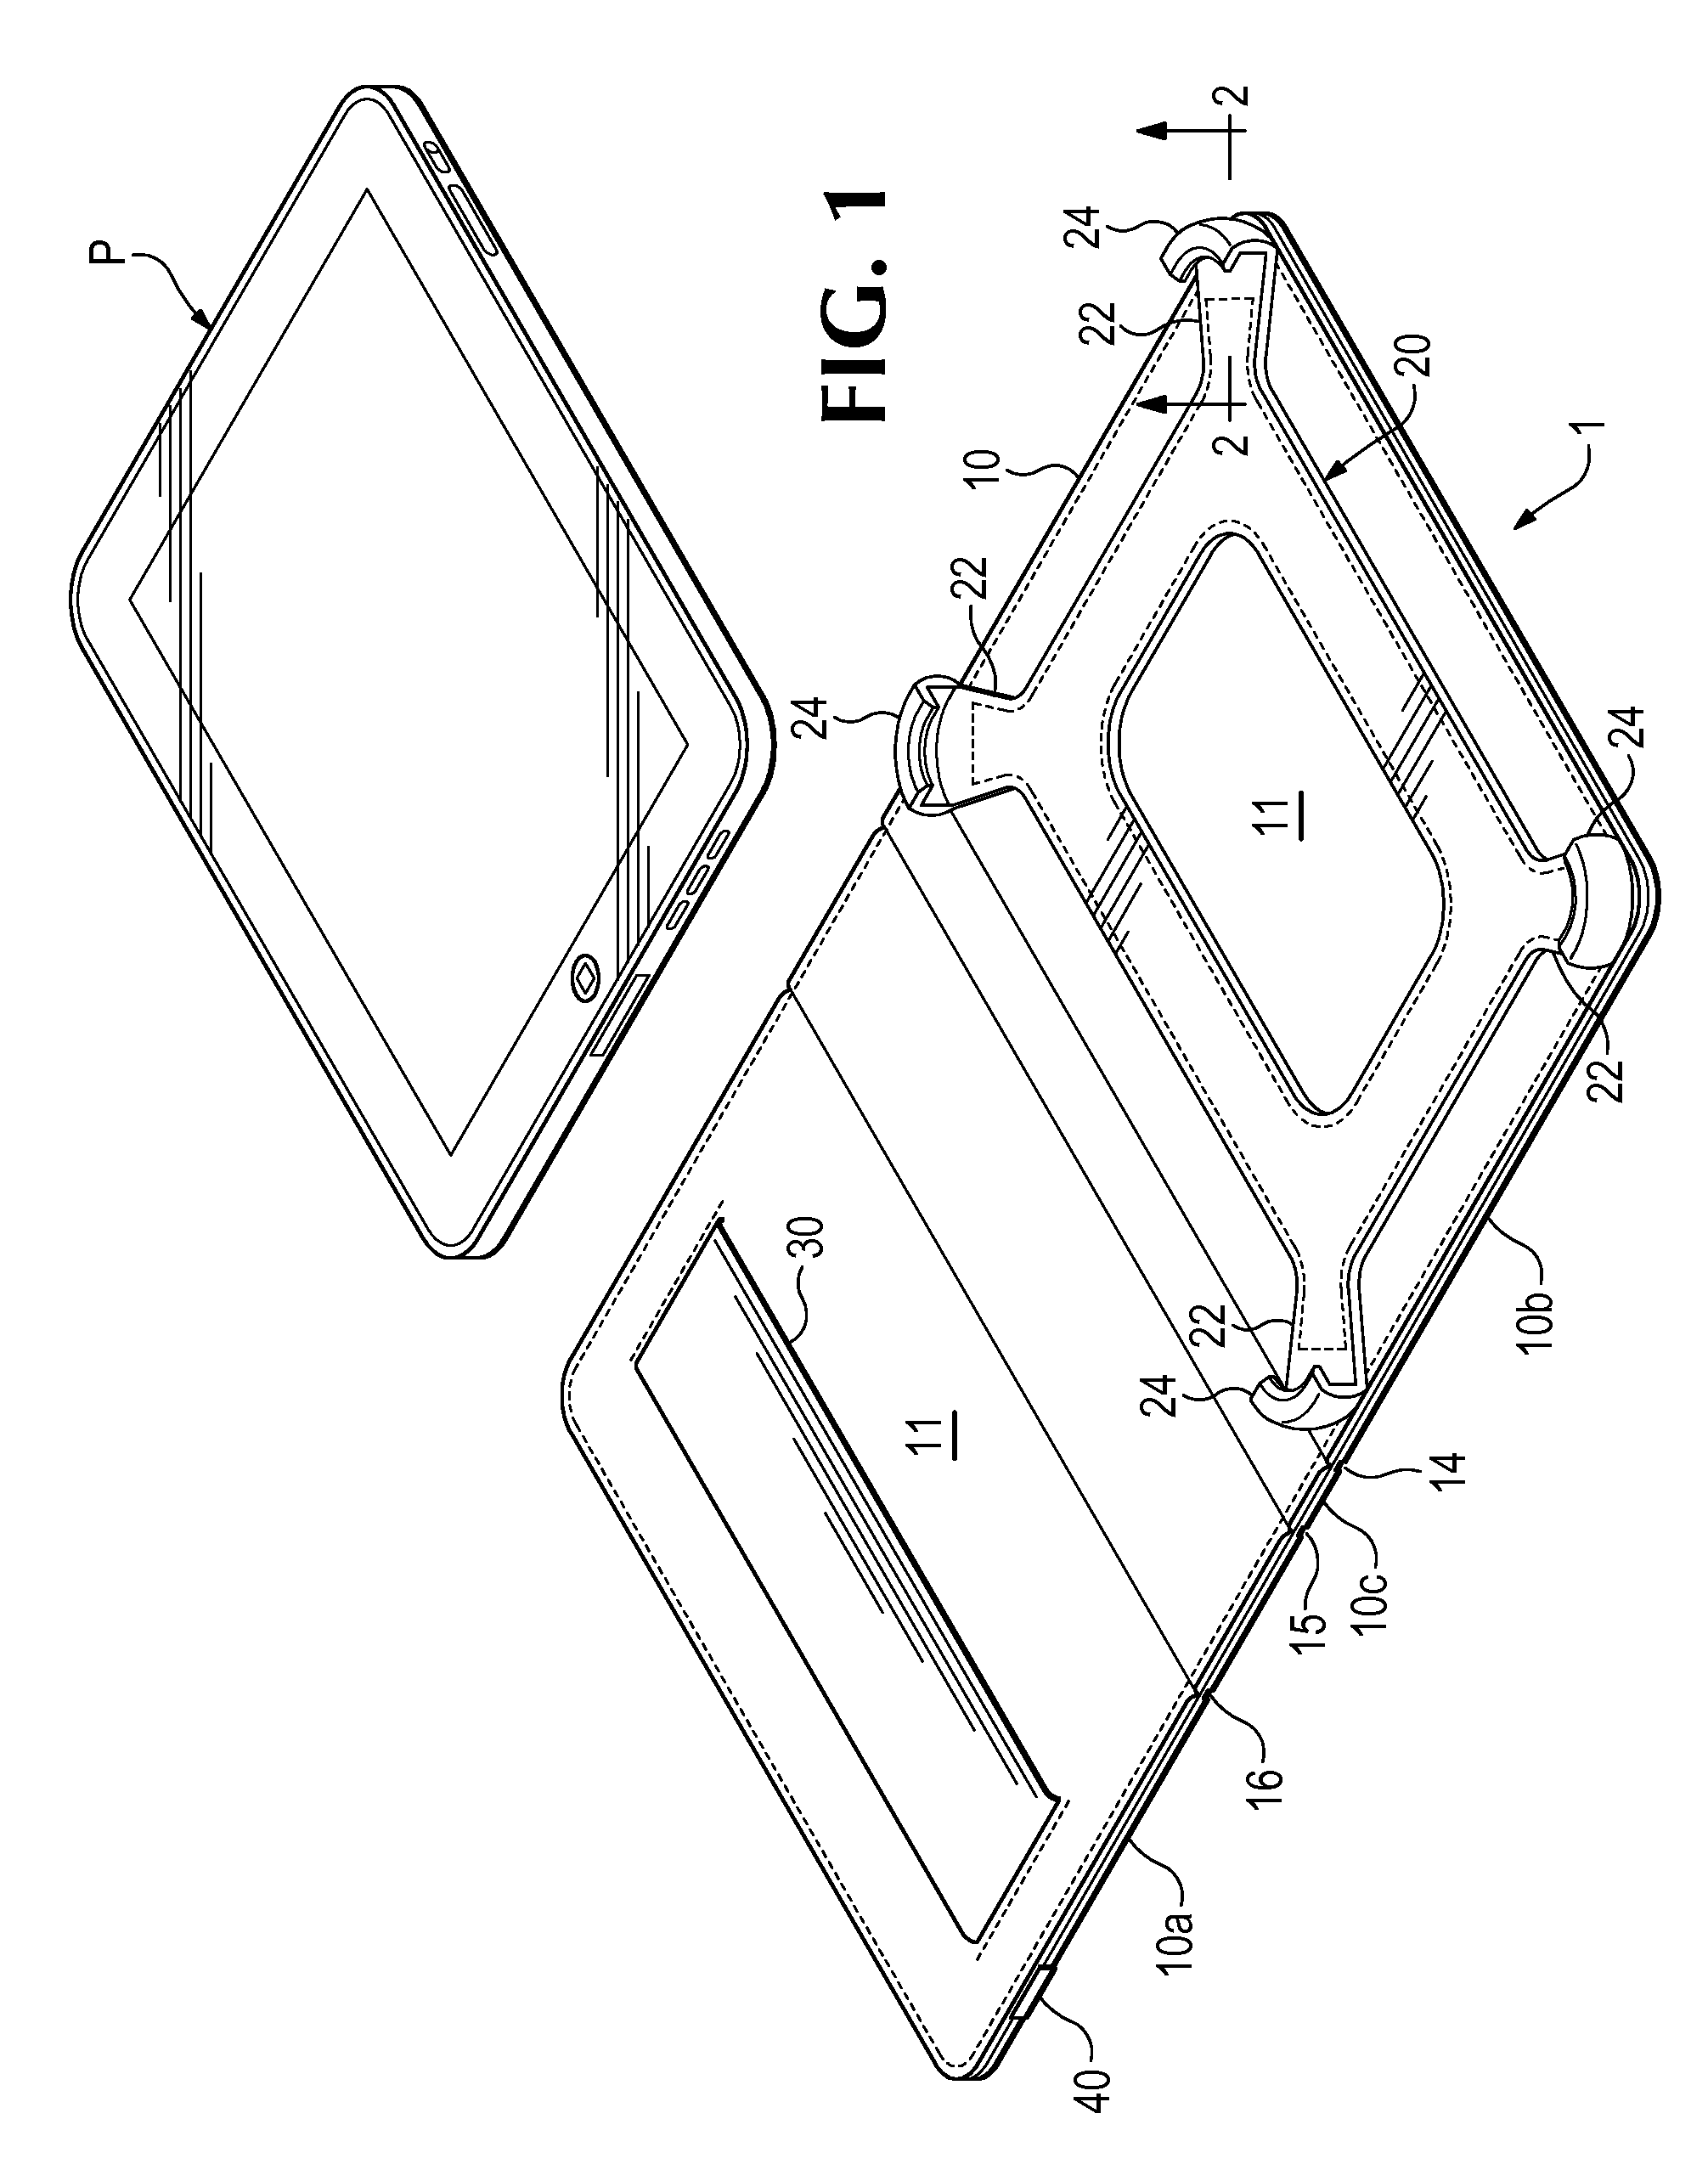 Cover for portable electronic device